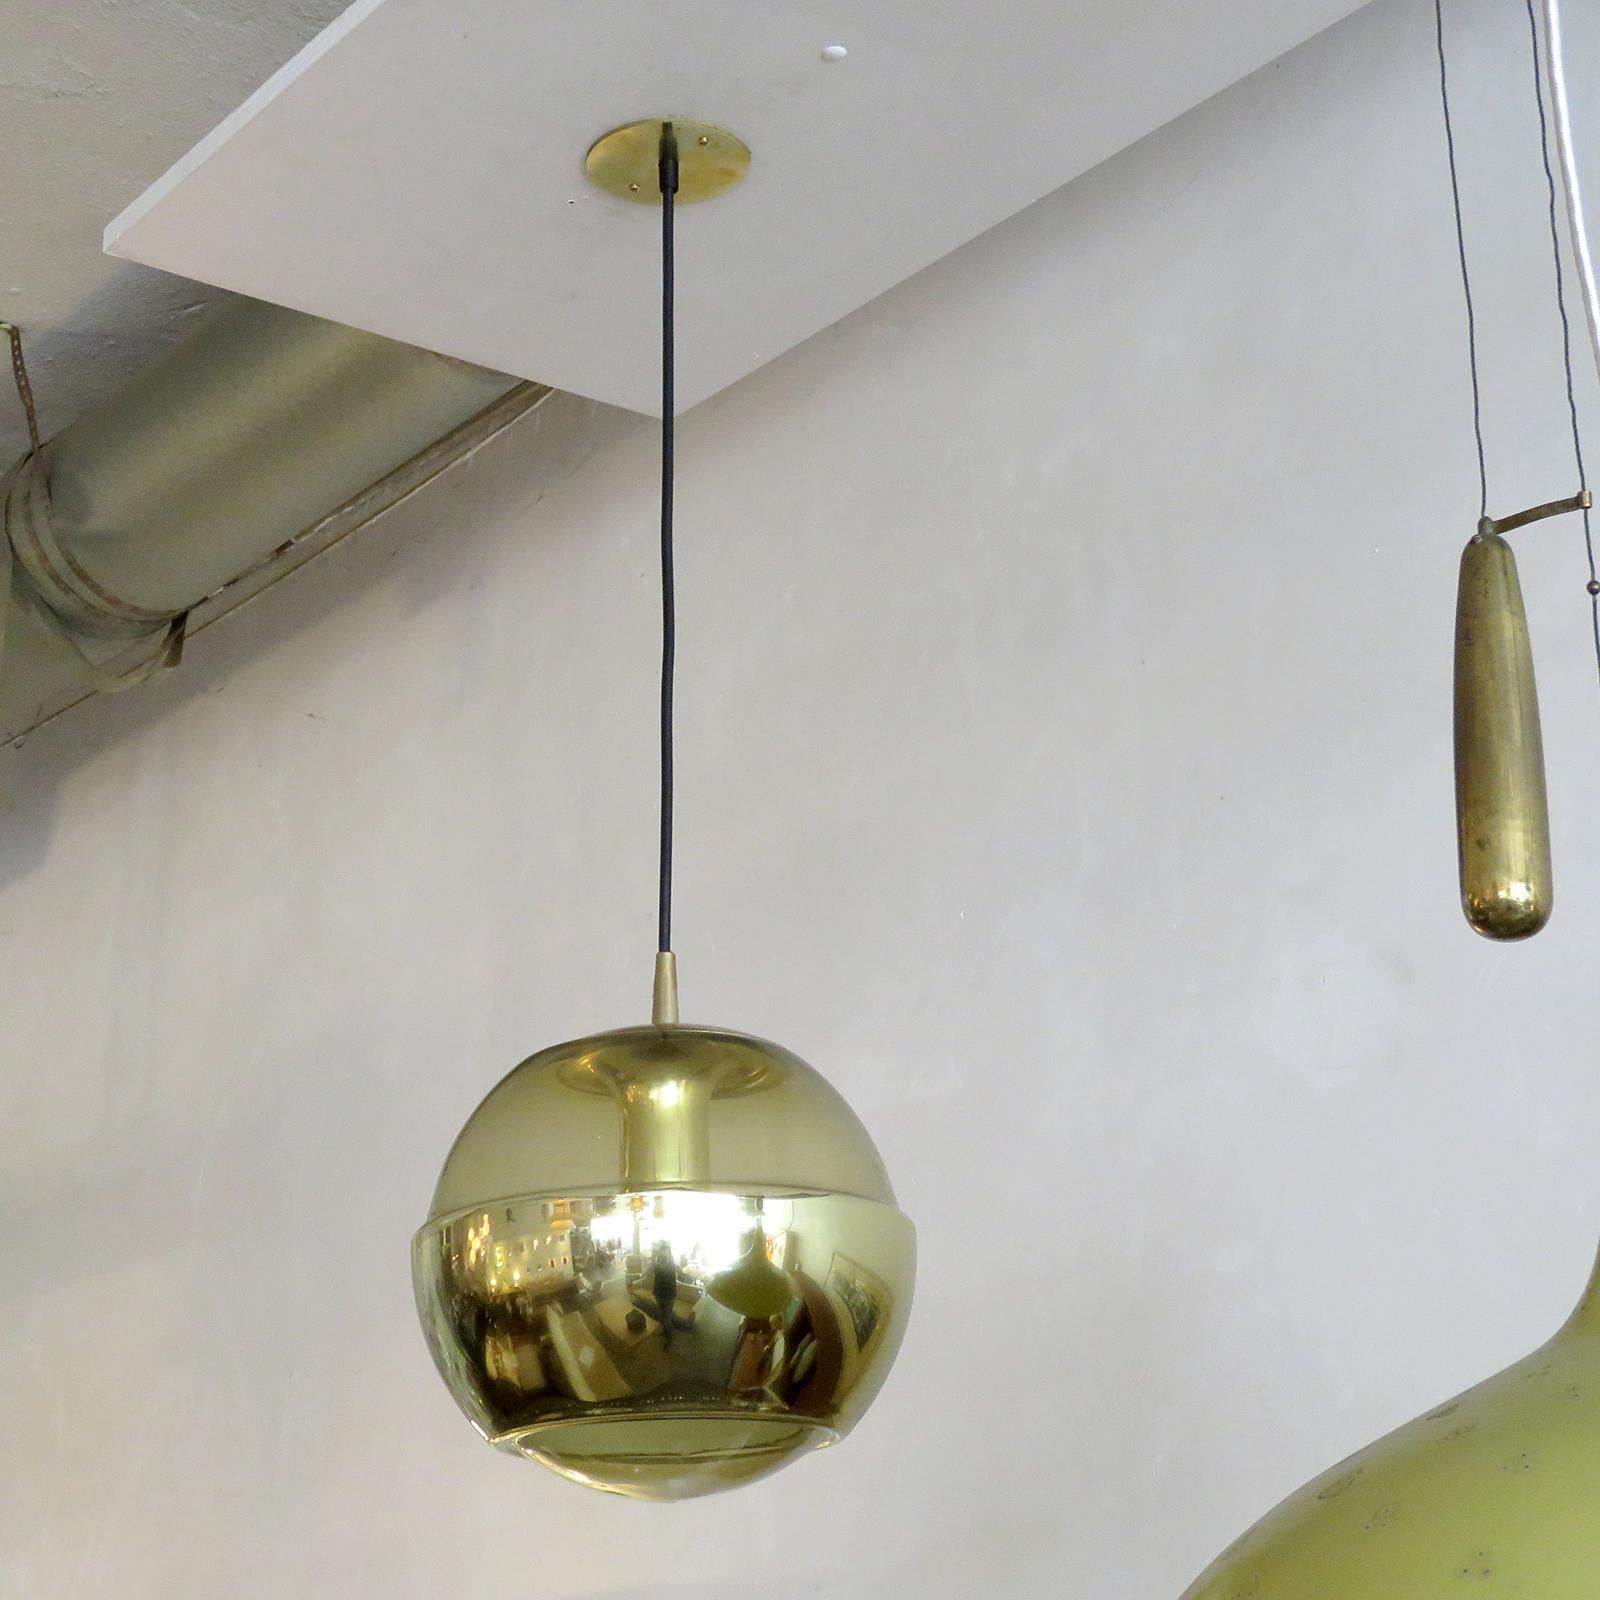 molded, smoked glass hanging fixtures by Peill & Putzler, with an opaque, brass colored layer across the bottom part of the globes, brass colored hardware and custom solid brass canopy, wired for US standards, one E27 socket per fixture, max.